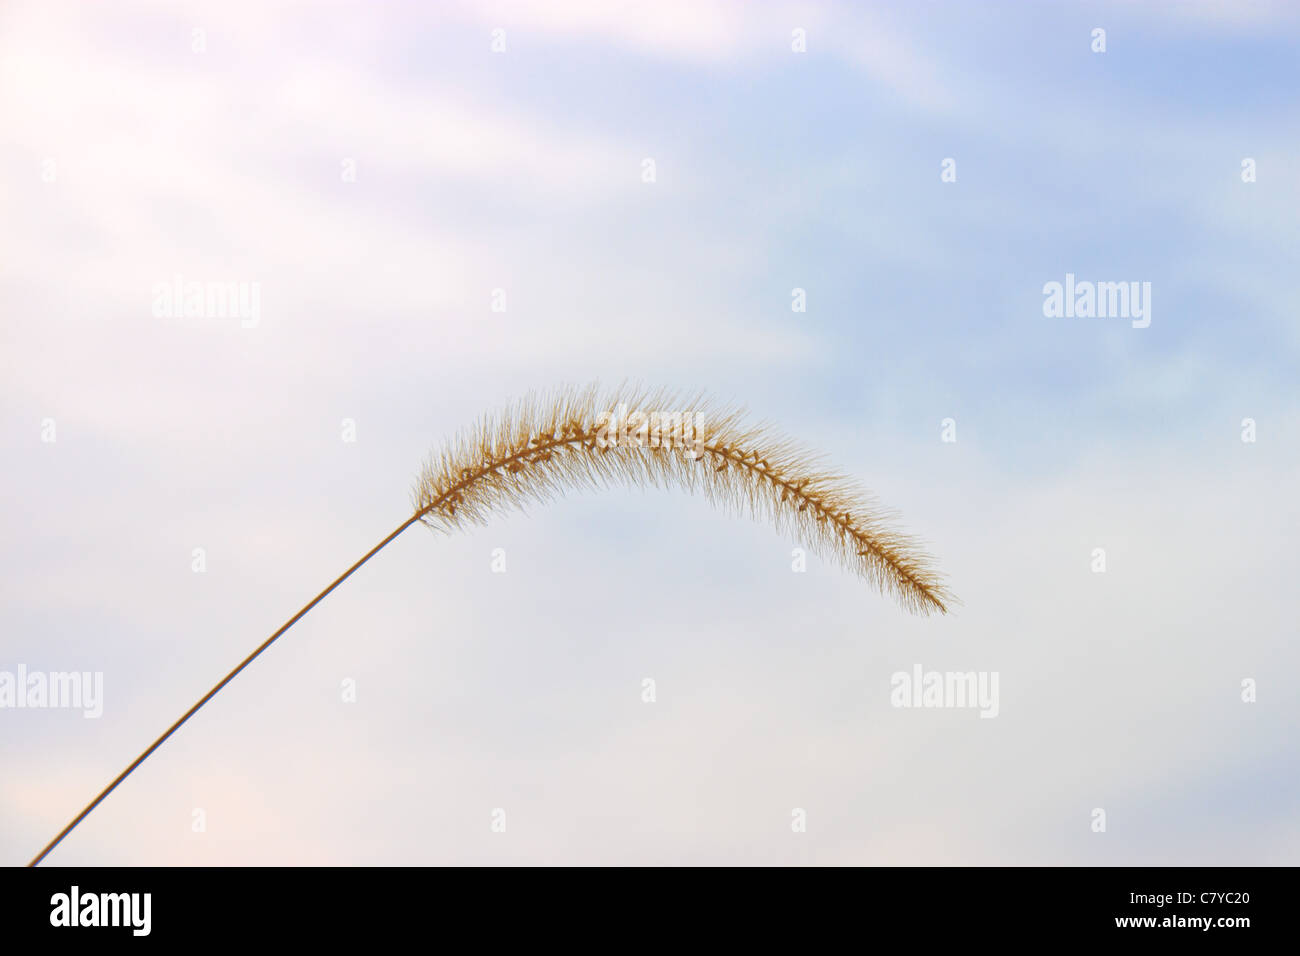 Golden timothy grass against blue cloudy sky Stock Photo